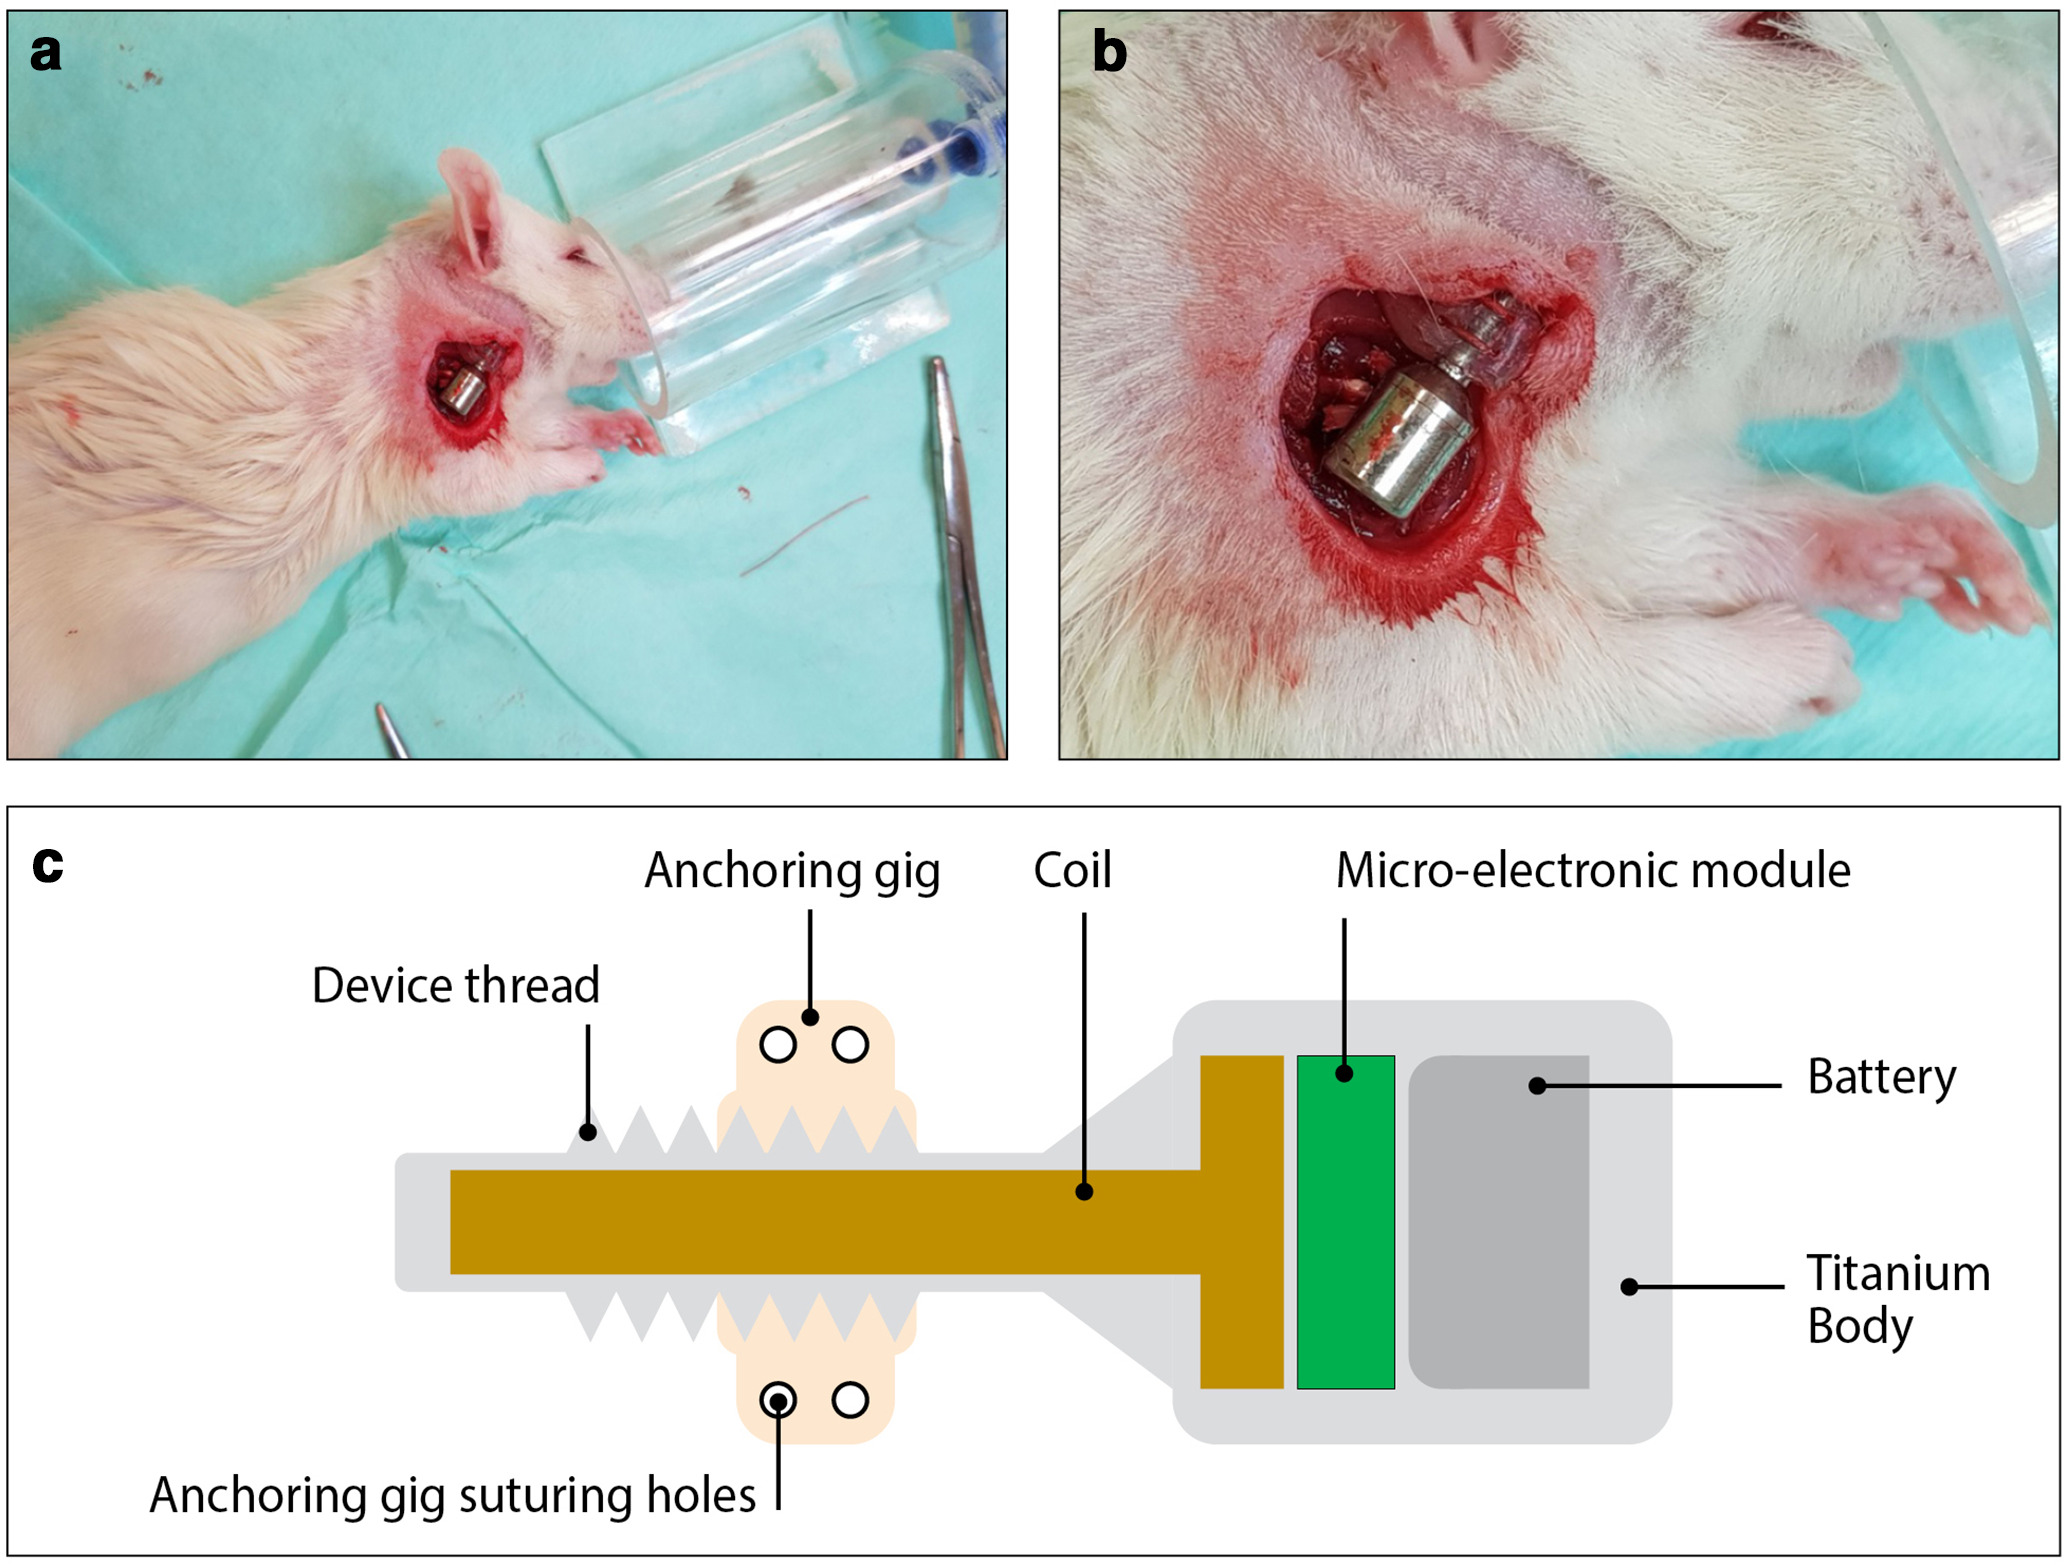 Fig. 1 
            a) and b) Miniaturized electromagnetic device (MED) implantation procedure in the subcutaneous space on the right shoulder. c) Schematic presentation of the MED-pulsed electromagnetic field (PEMF) generating device. The device is shaped like a dental healing abutment and made of a titanium body that houses a microelectronics module, micro battery, and coil.
          